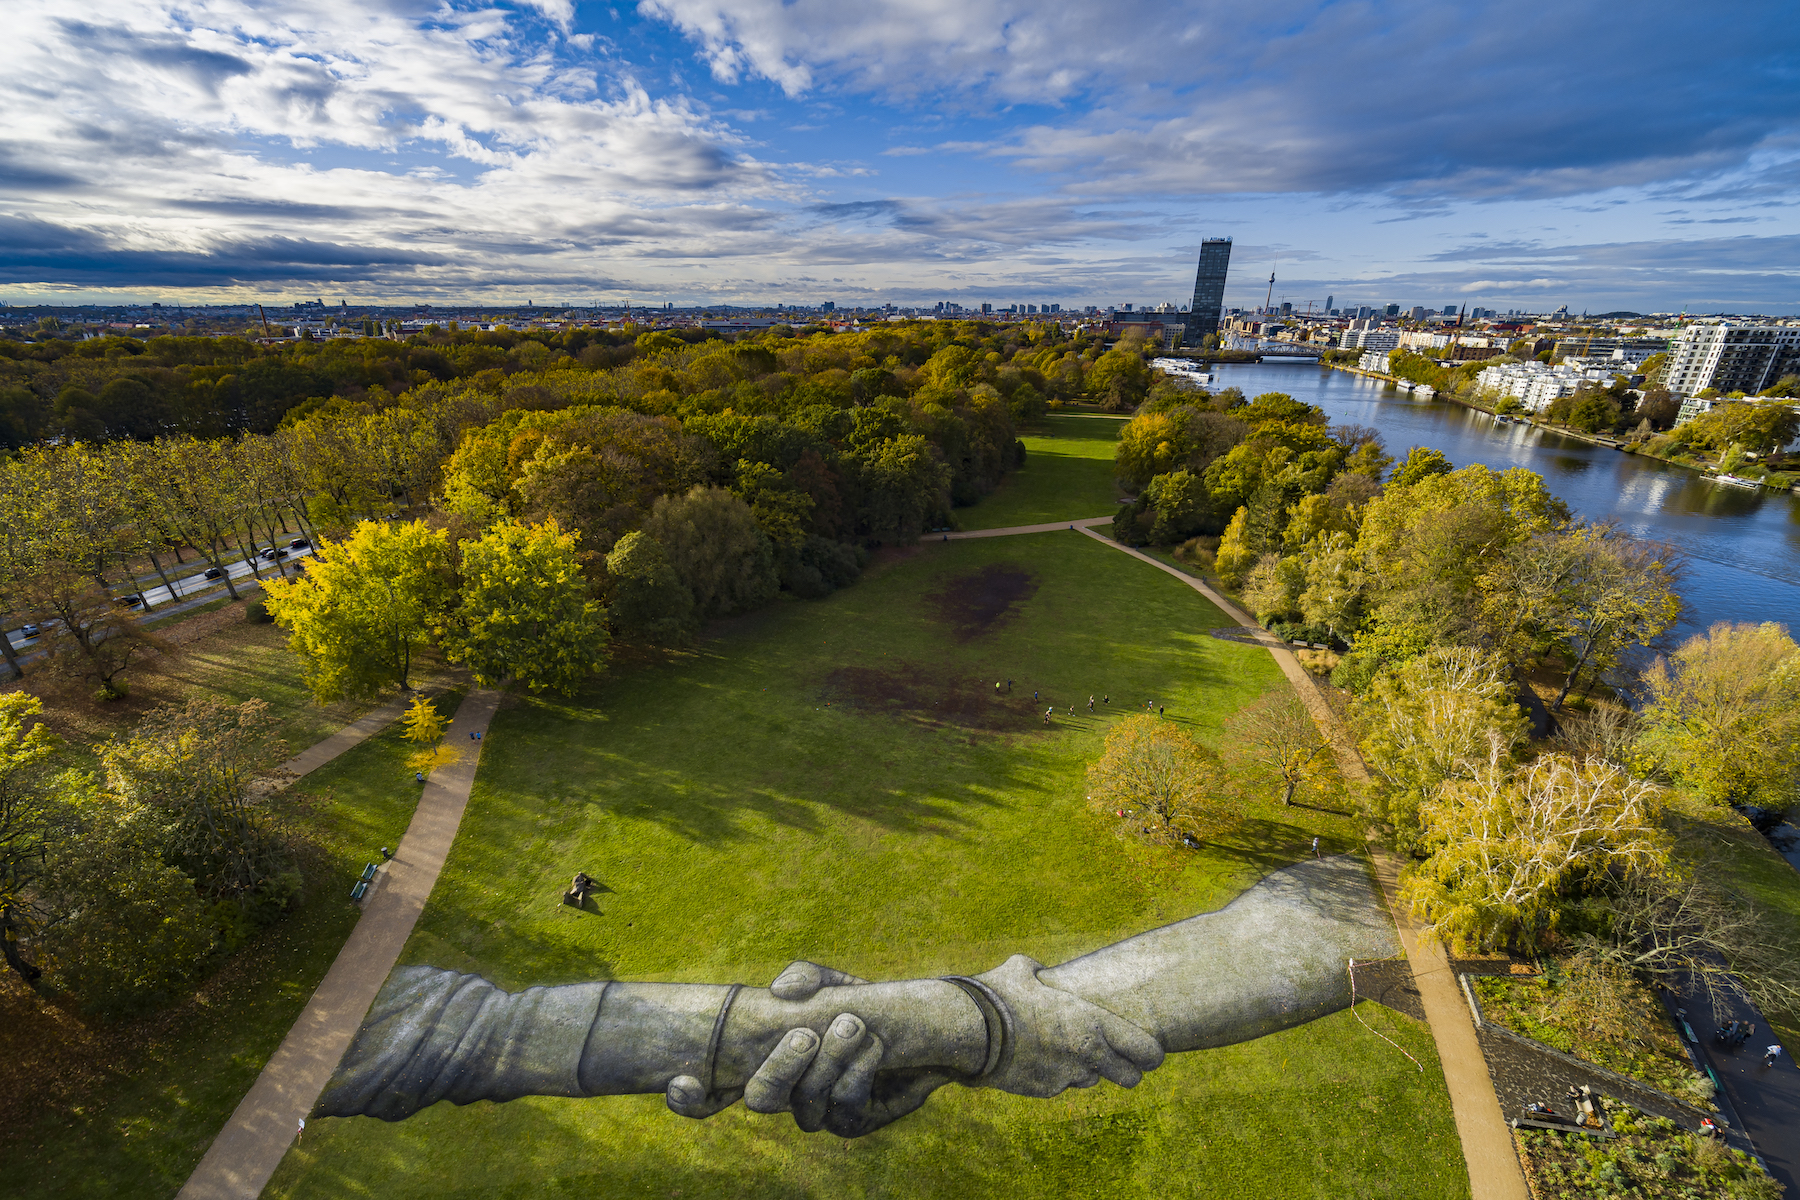 Artist Saype’s Worldwide Symbolic Human Chain extends to Berlin, 2019